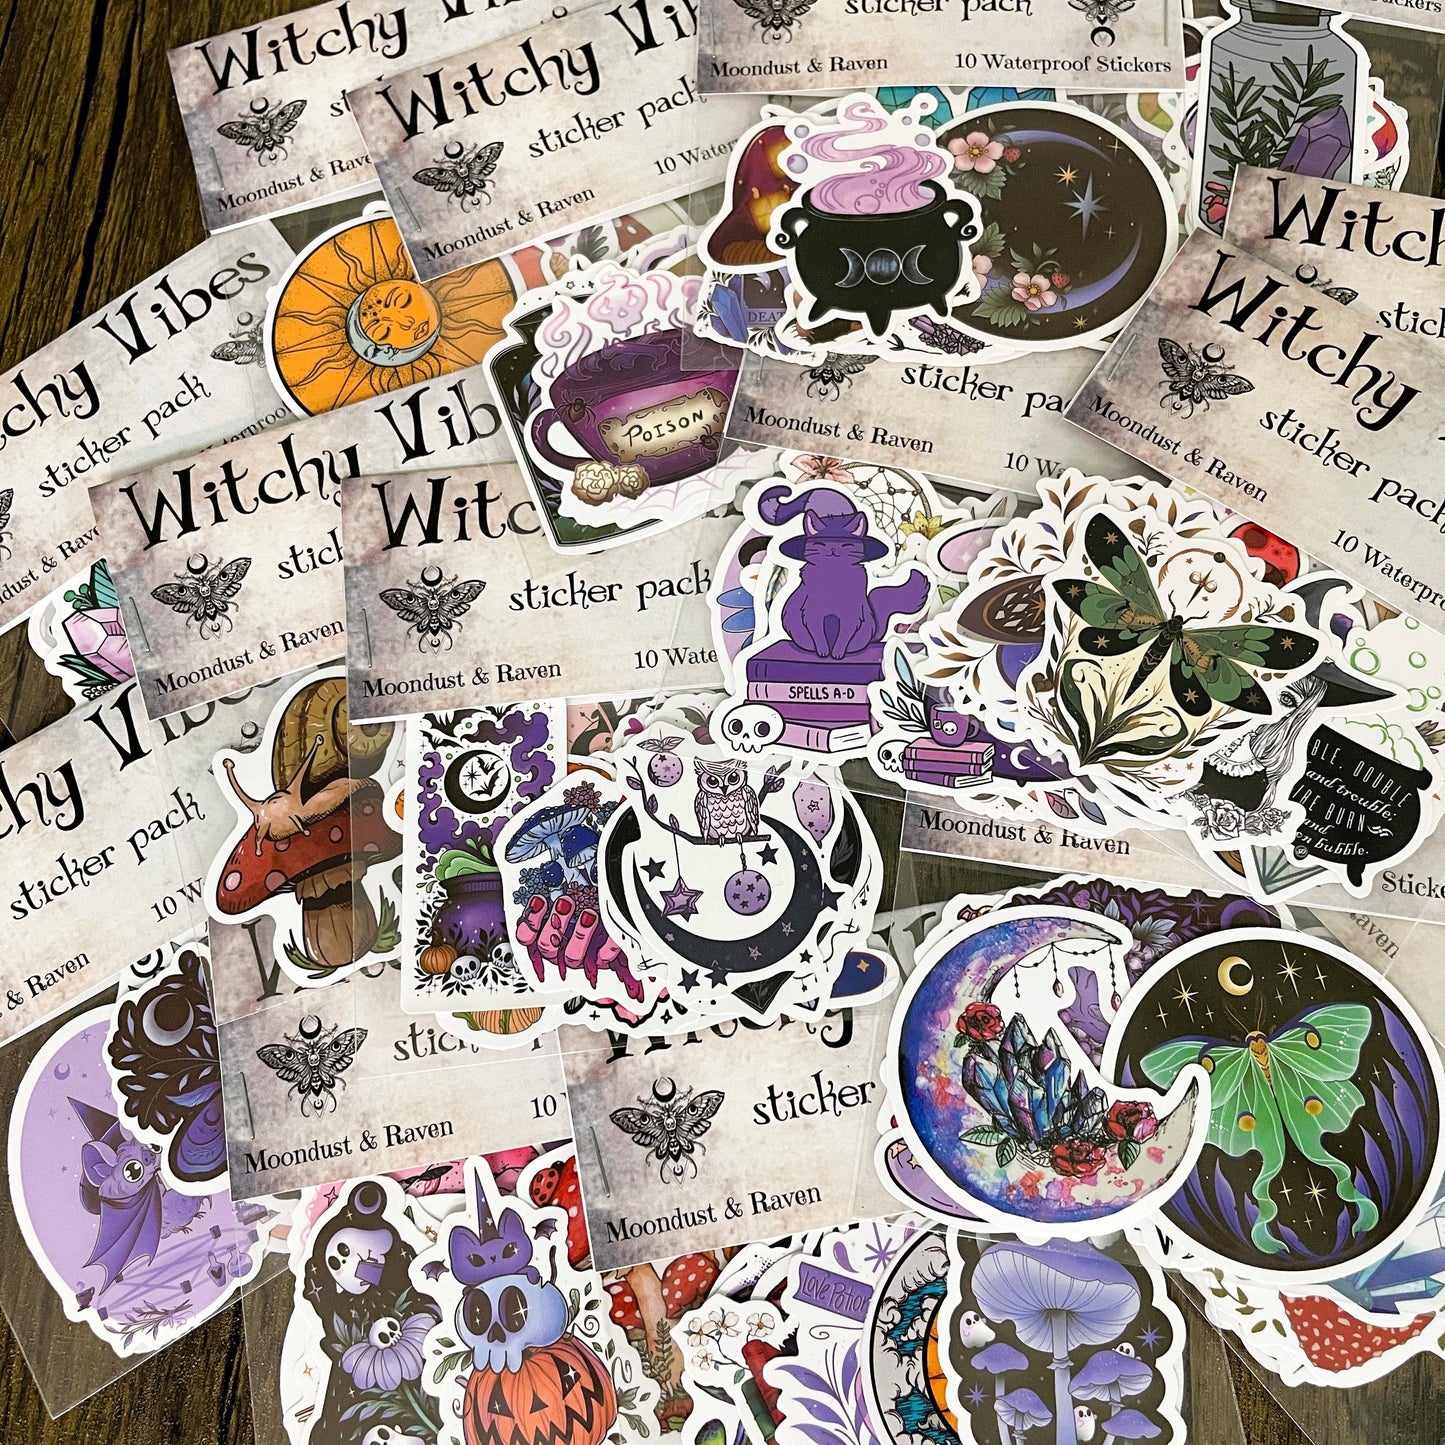 Witchy Vibes Sticker Packs, Waterproof Witchy Stickers